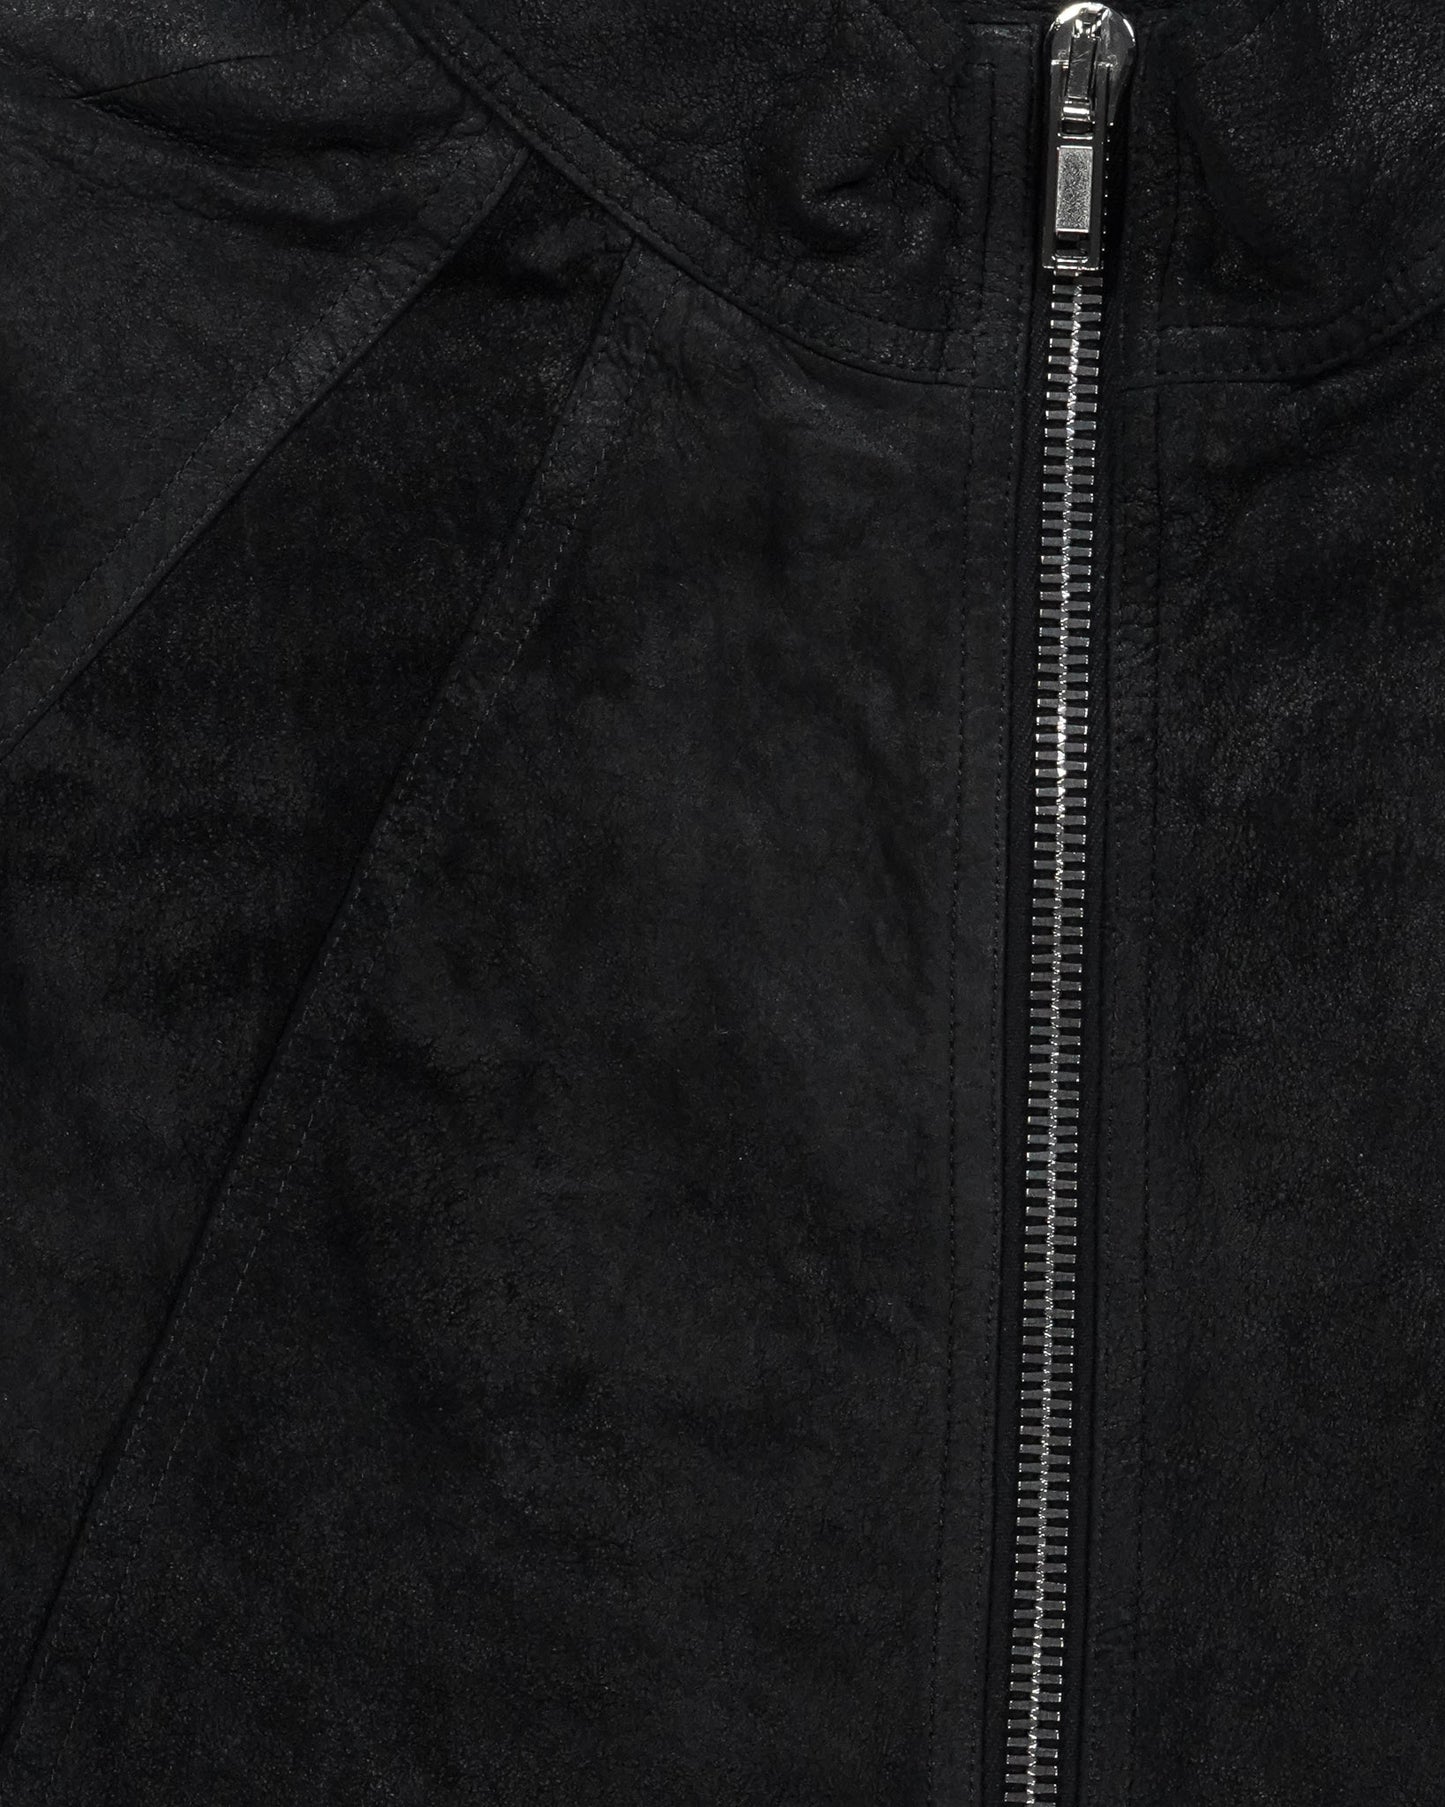 Rick Owens “Blistered” Leather Jacket - SS08 "Creatch"